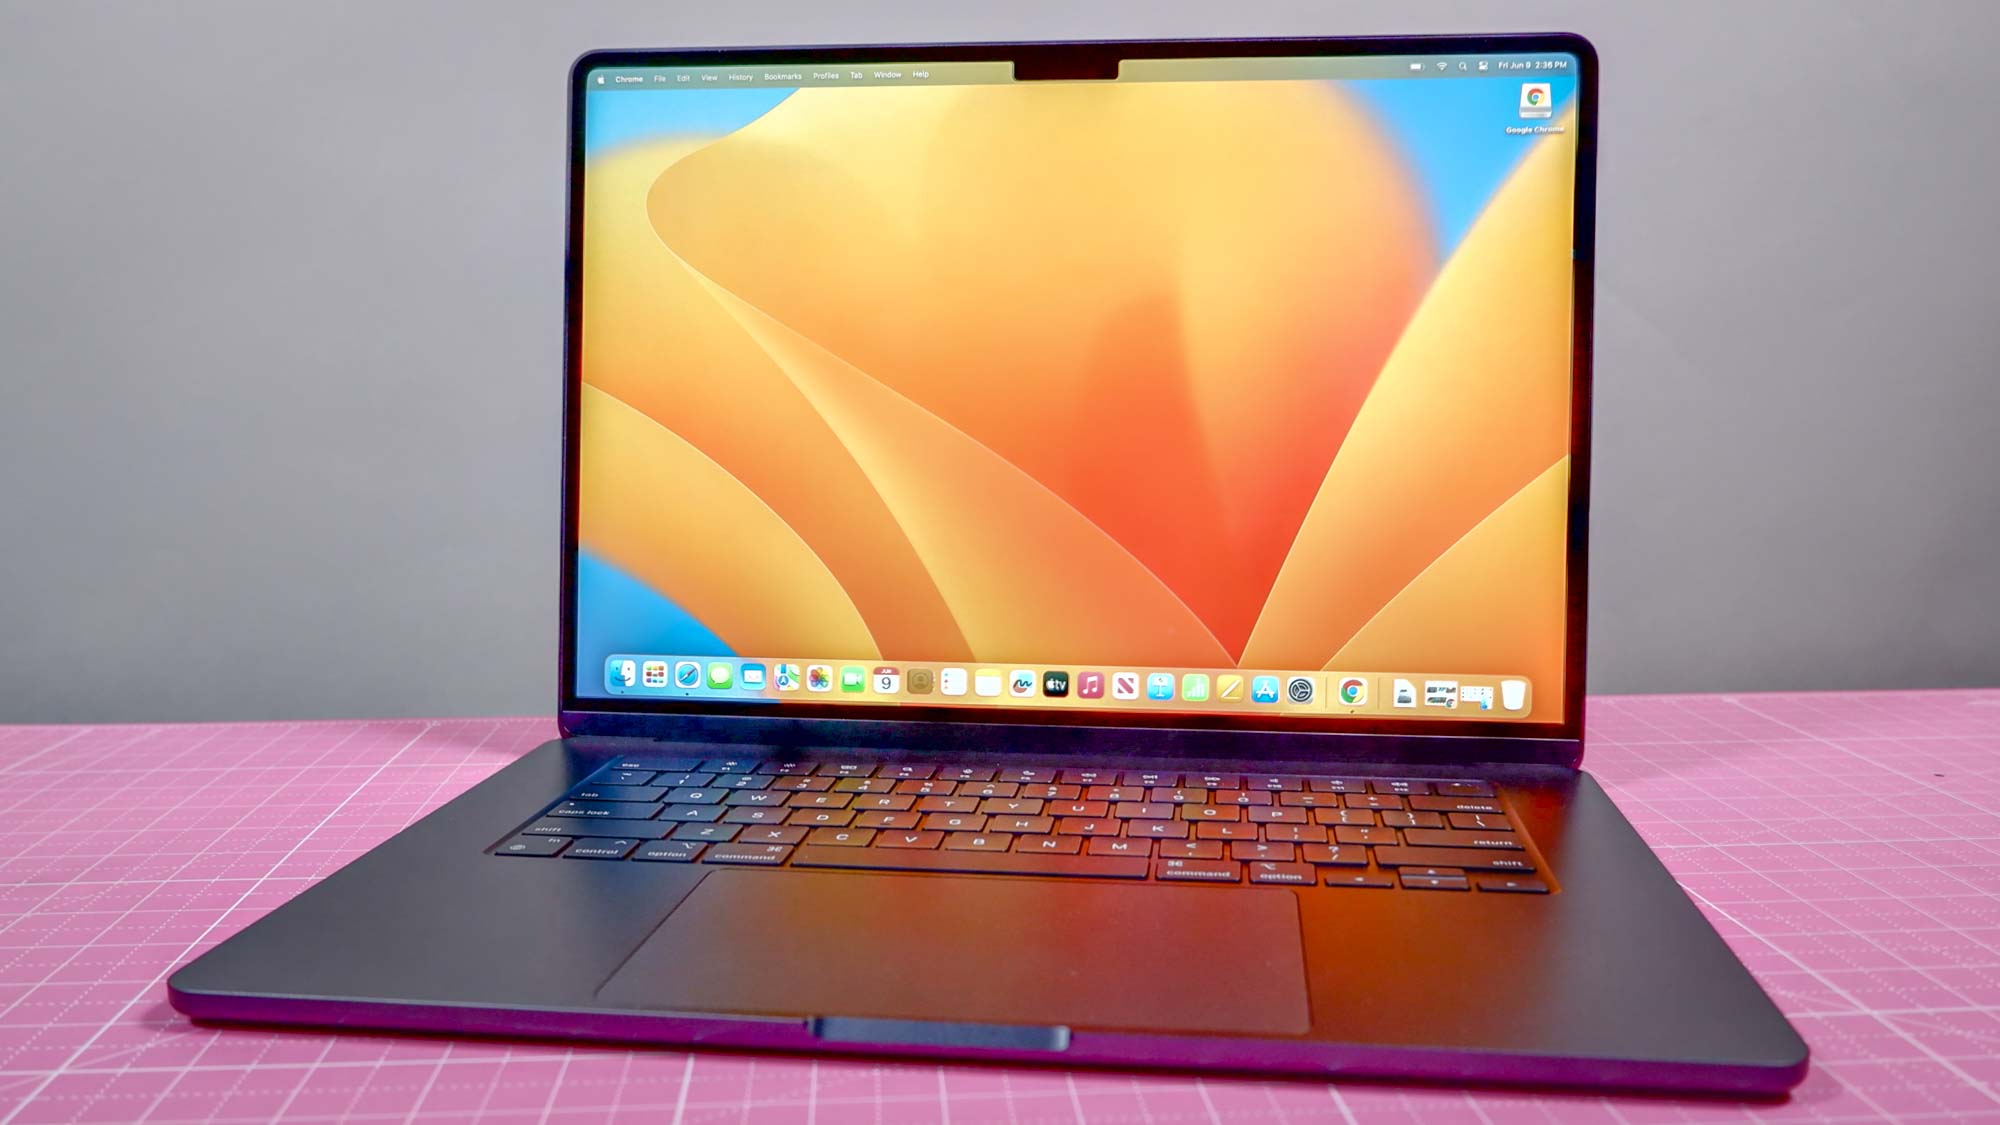 MacBook Air 15-inch release date, price, specs and more